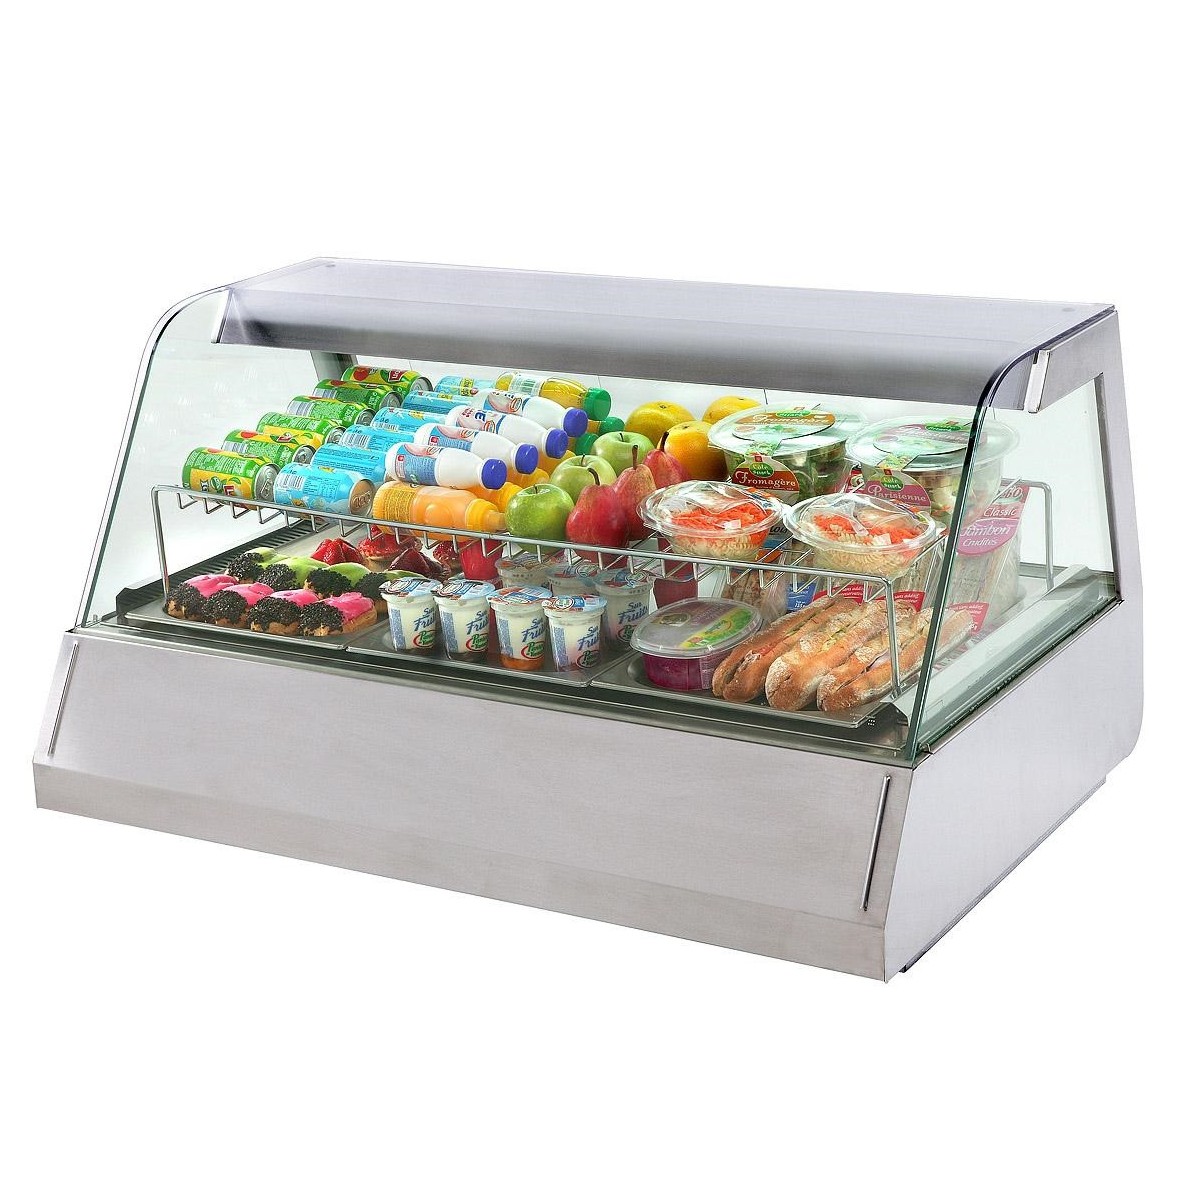 https://sotrimat.fr/460-product_zoom/vitrine-exposition-modele-1200-eco-froid.jpg